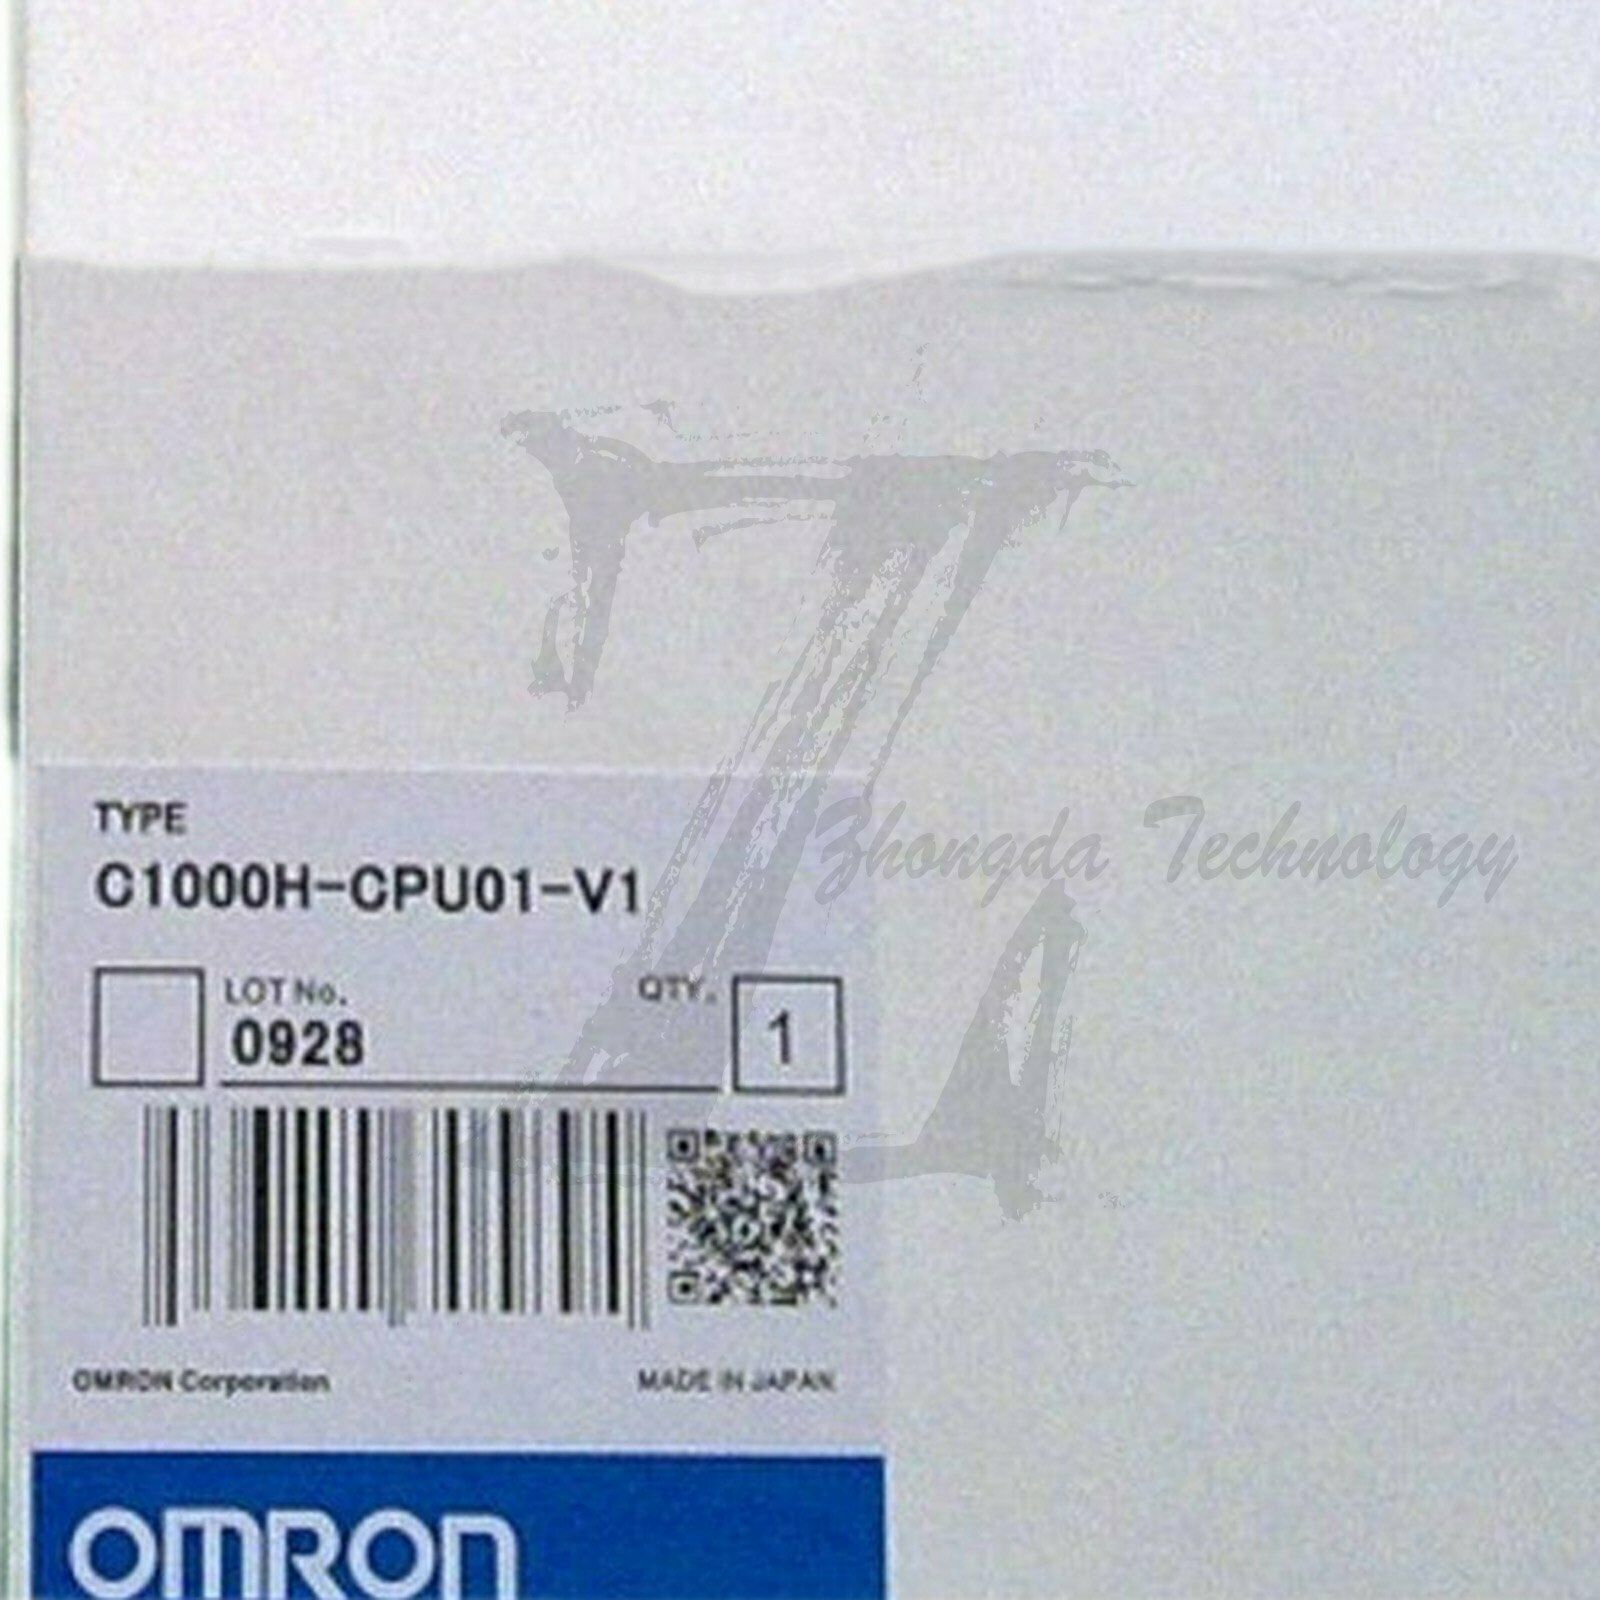 1PC new Omron C1000H-CPU01-V1 module one year warranty KOEED 500+, 80%, import_2020_10_10_031751, Omron, Other